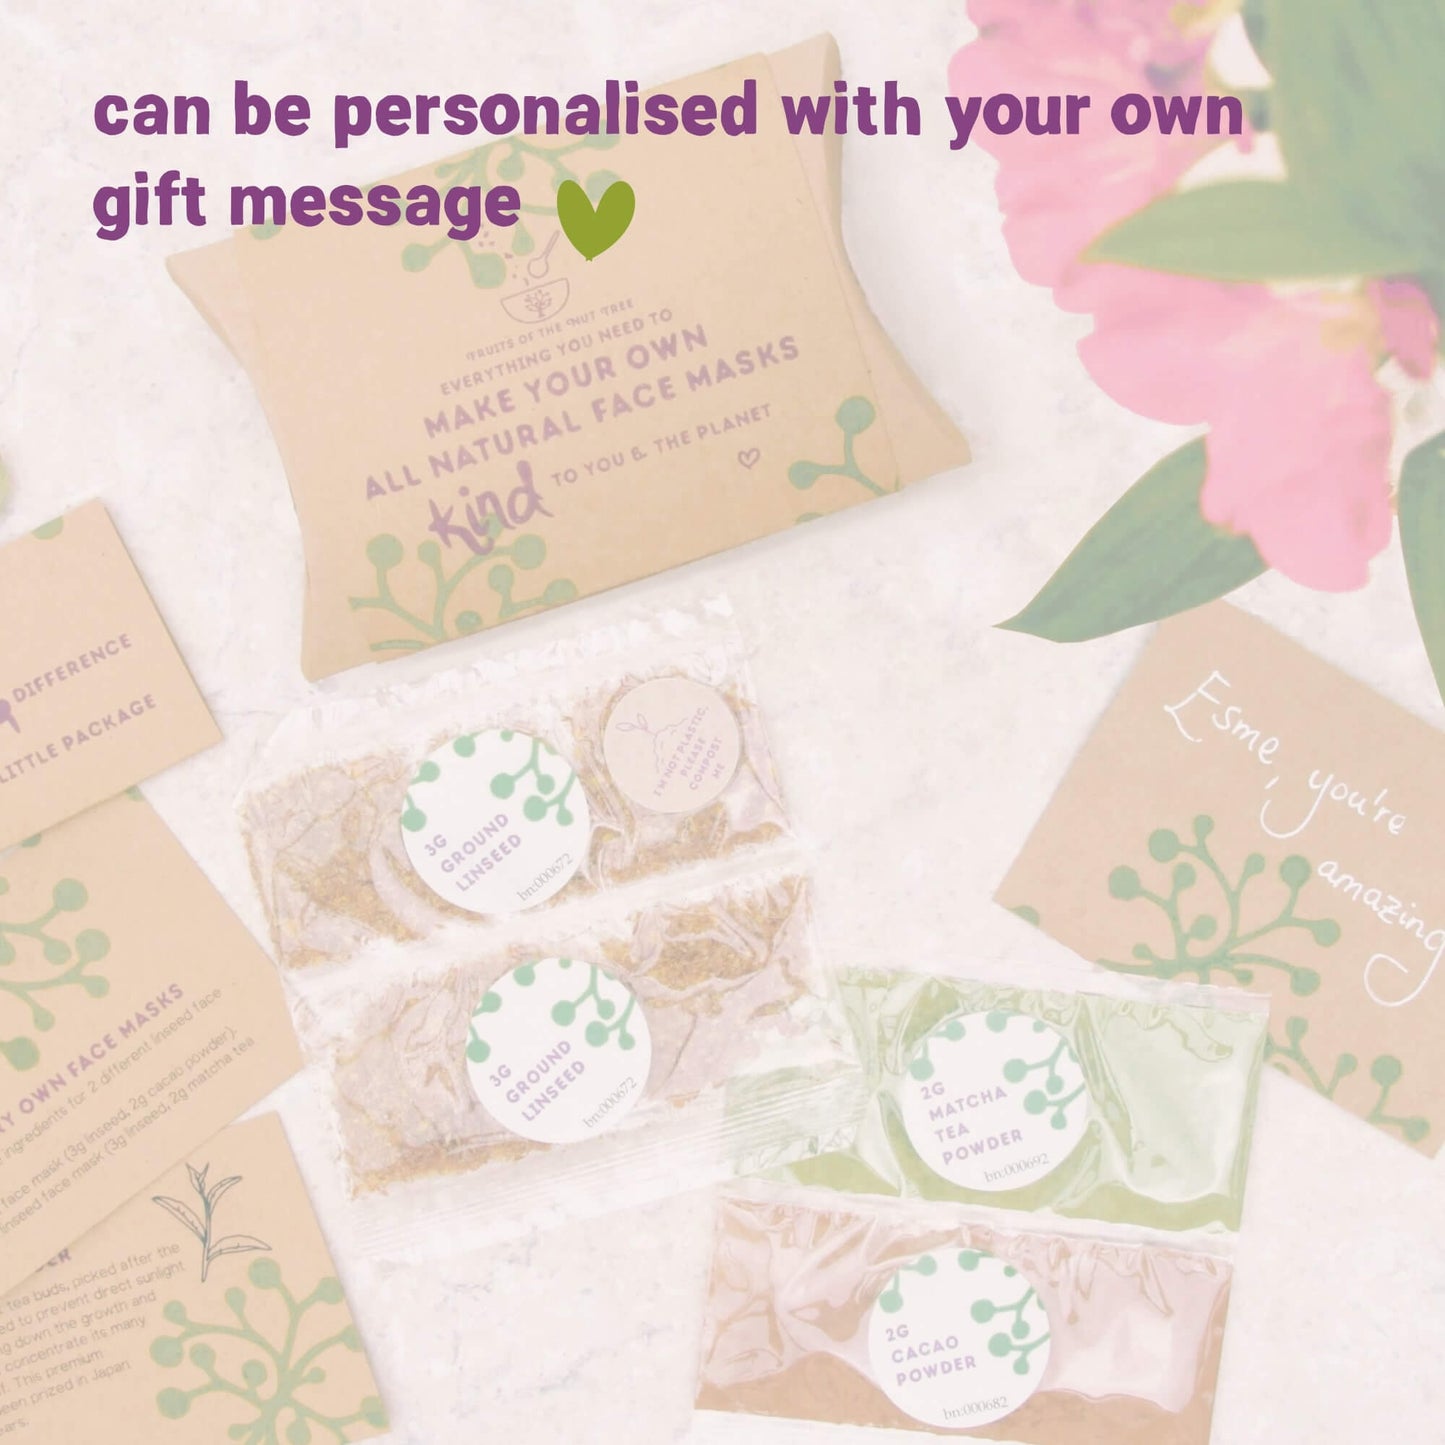 add personalised gift message to you matcha face mask kit